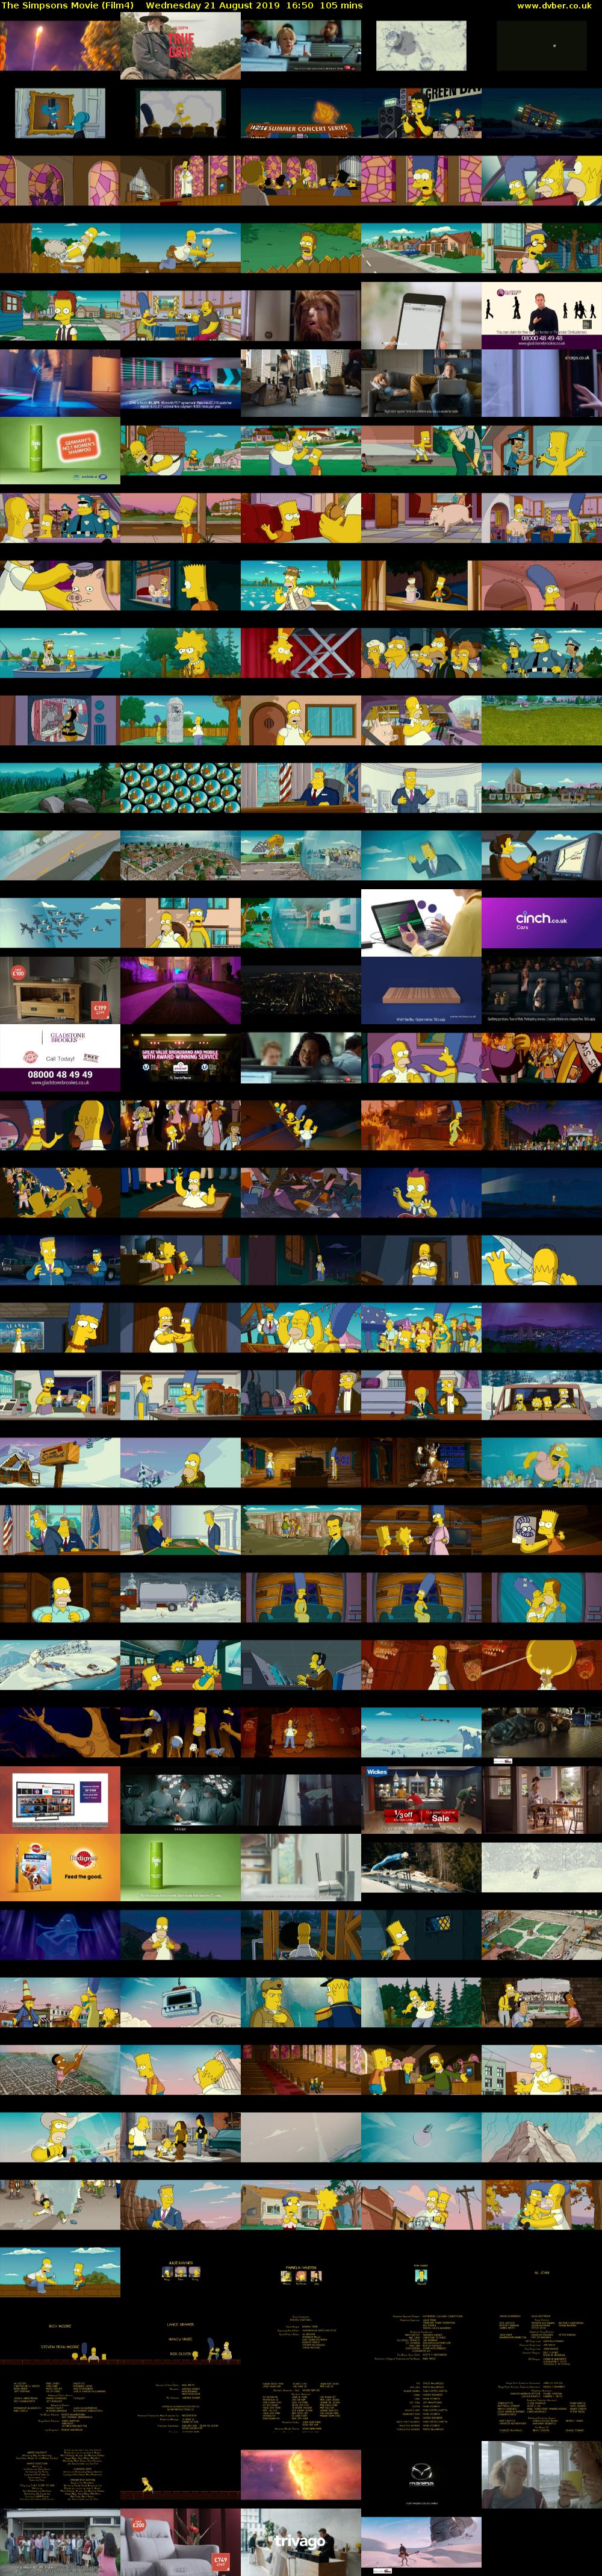 The Simpsons Movie (Film4) Wednesday 21 August 2019 16:50 - 18:35